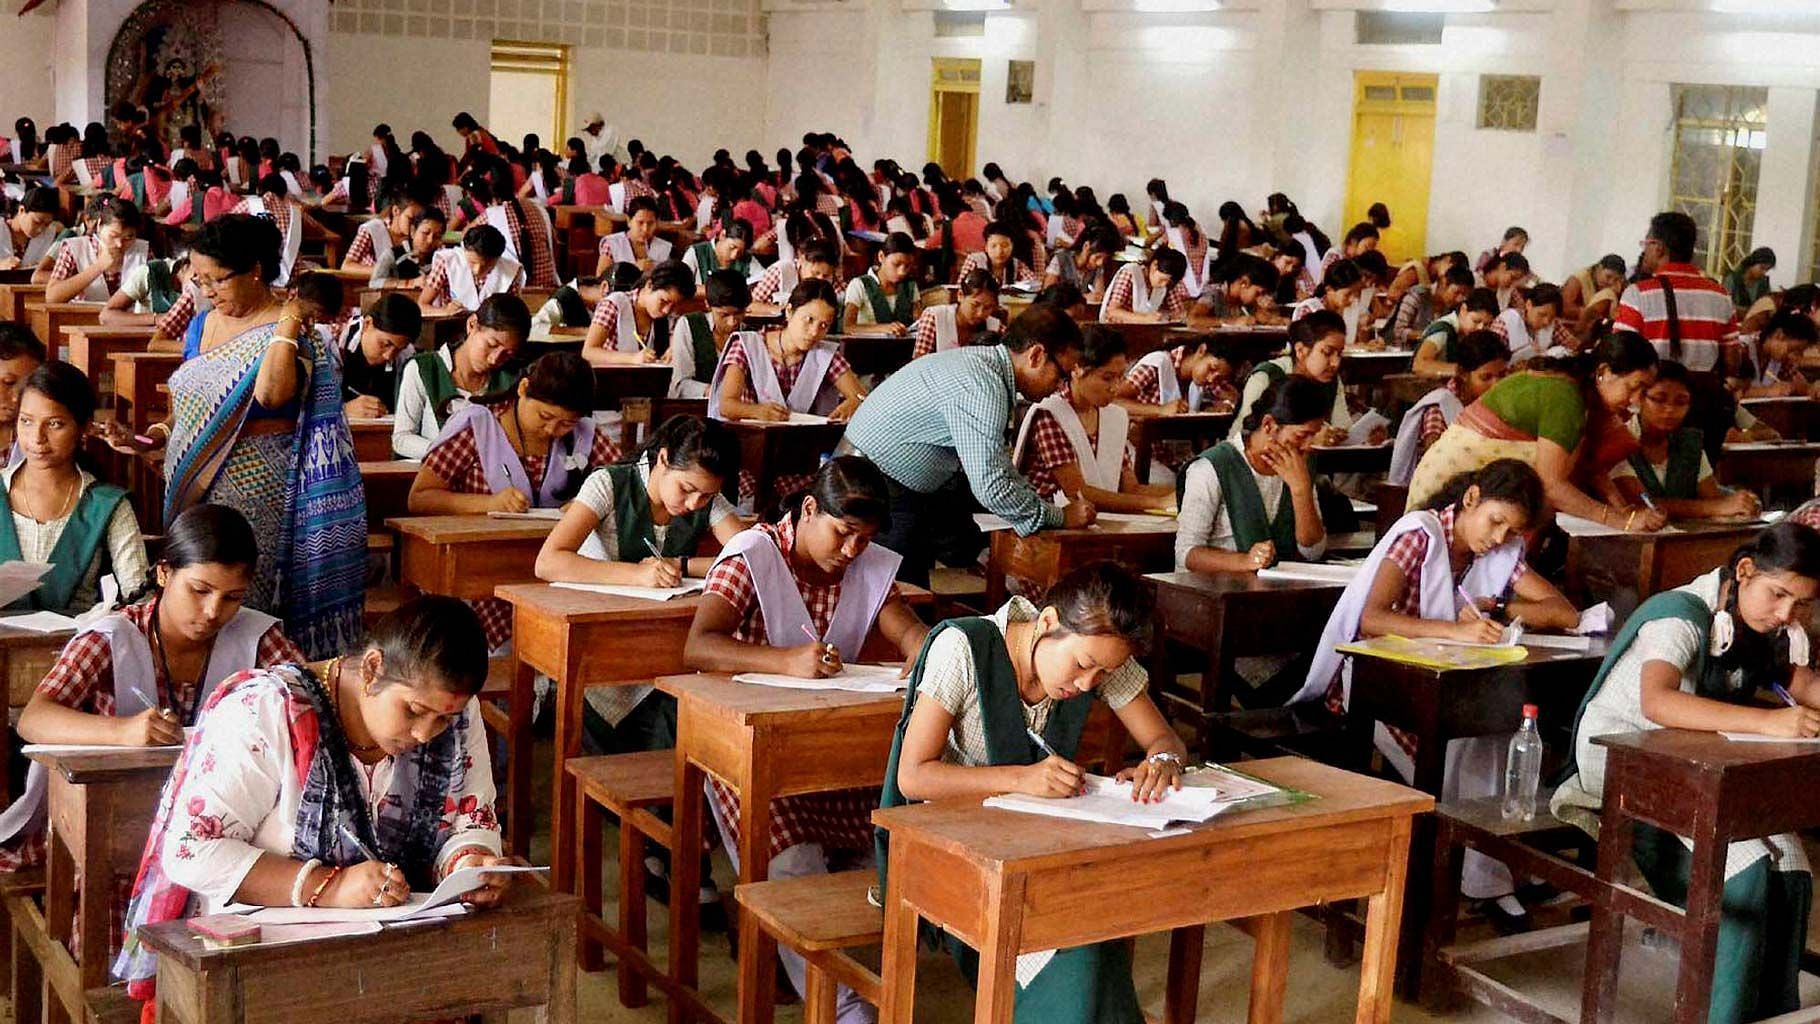 CBSE students taking the board exam. Image used for representation.